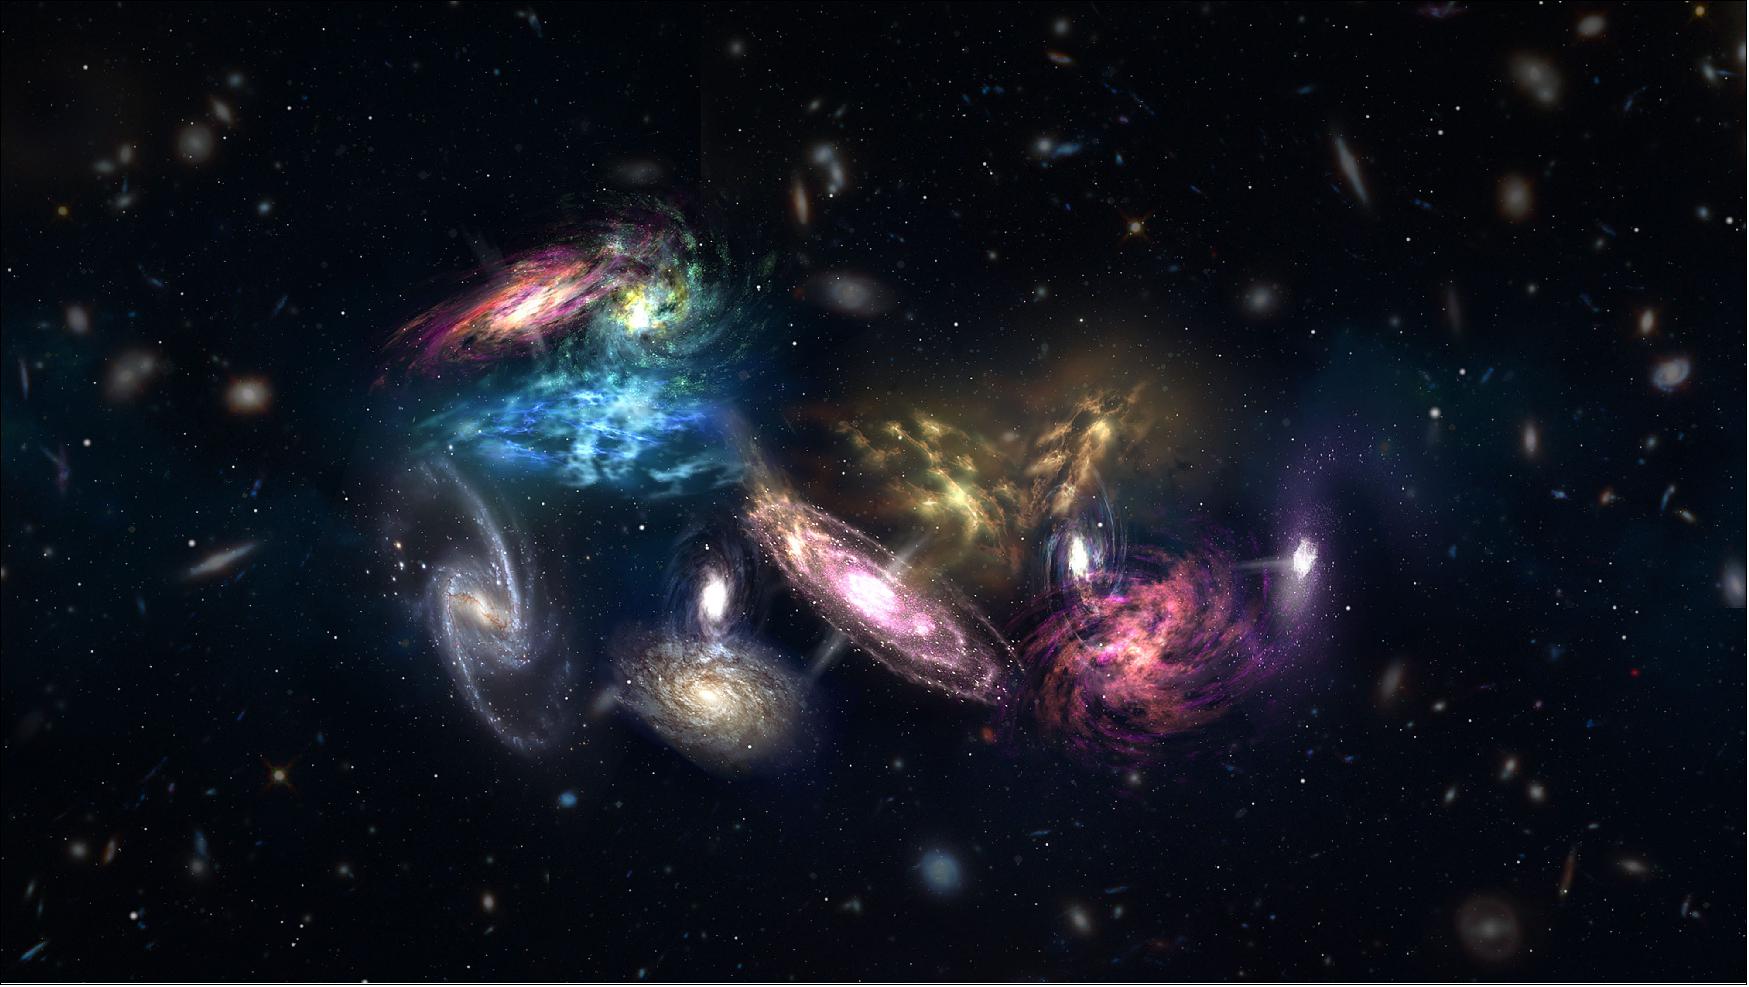 Figure 61: Artist impression of the 14 galaxies detected by ALMA as they appear in the very early, very distant universe. These galaxies are in the process of merging and will eventually form the core of a massive galaxy cluster (image credit: NRAO/AUI/NSF; S. Dagnello)